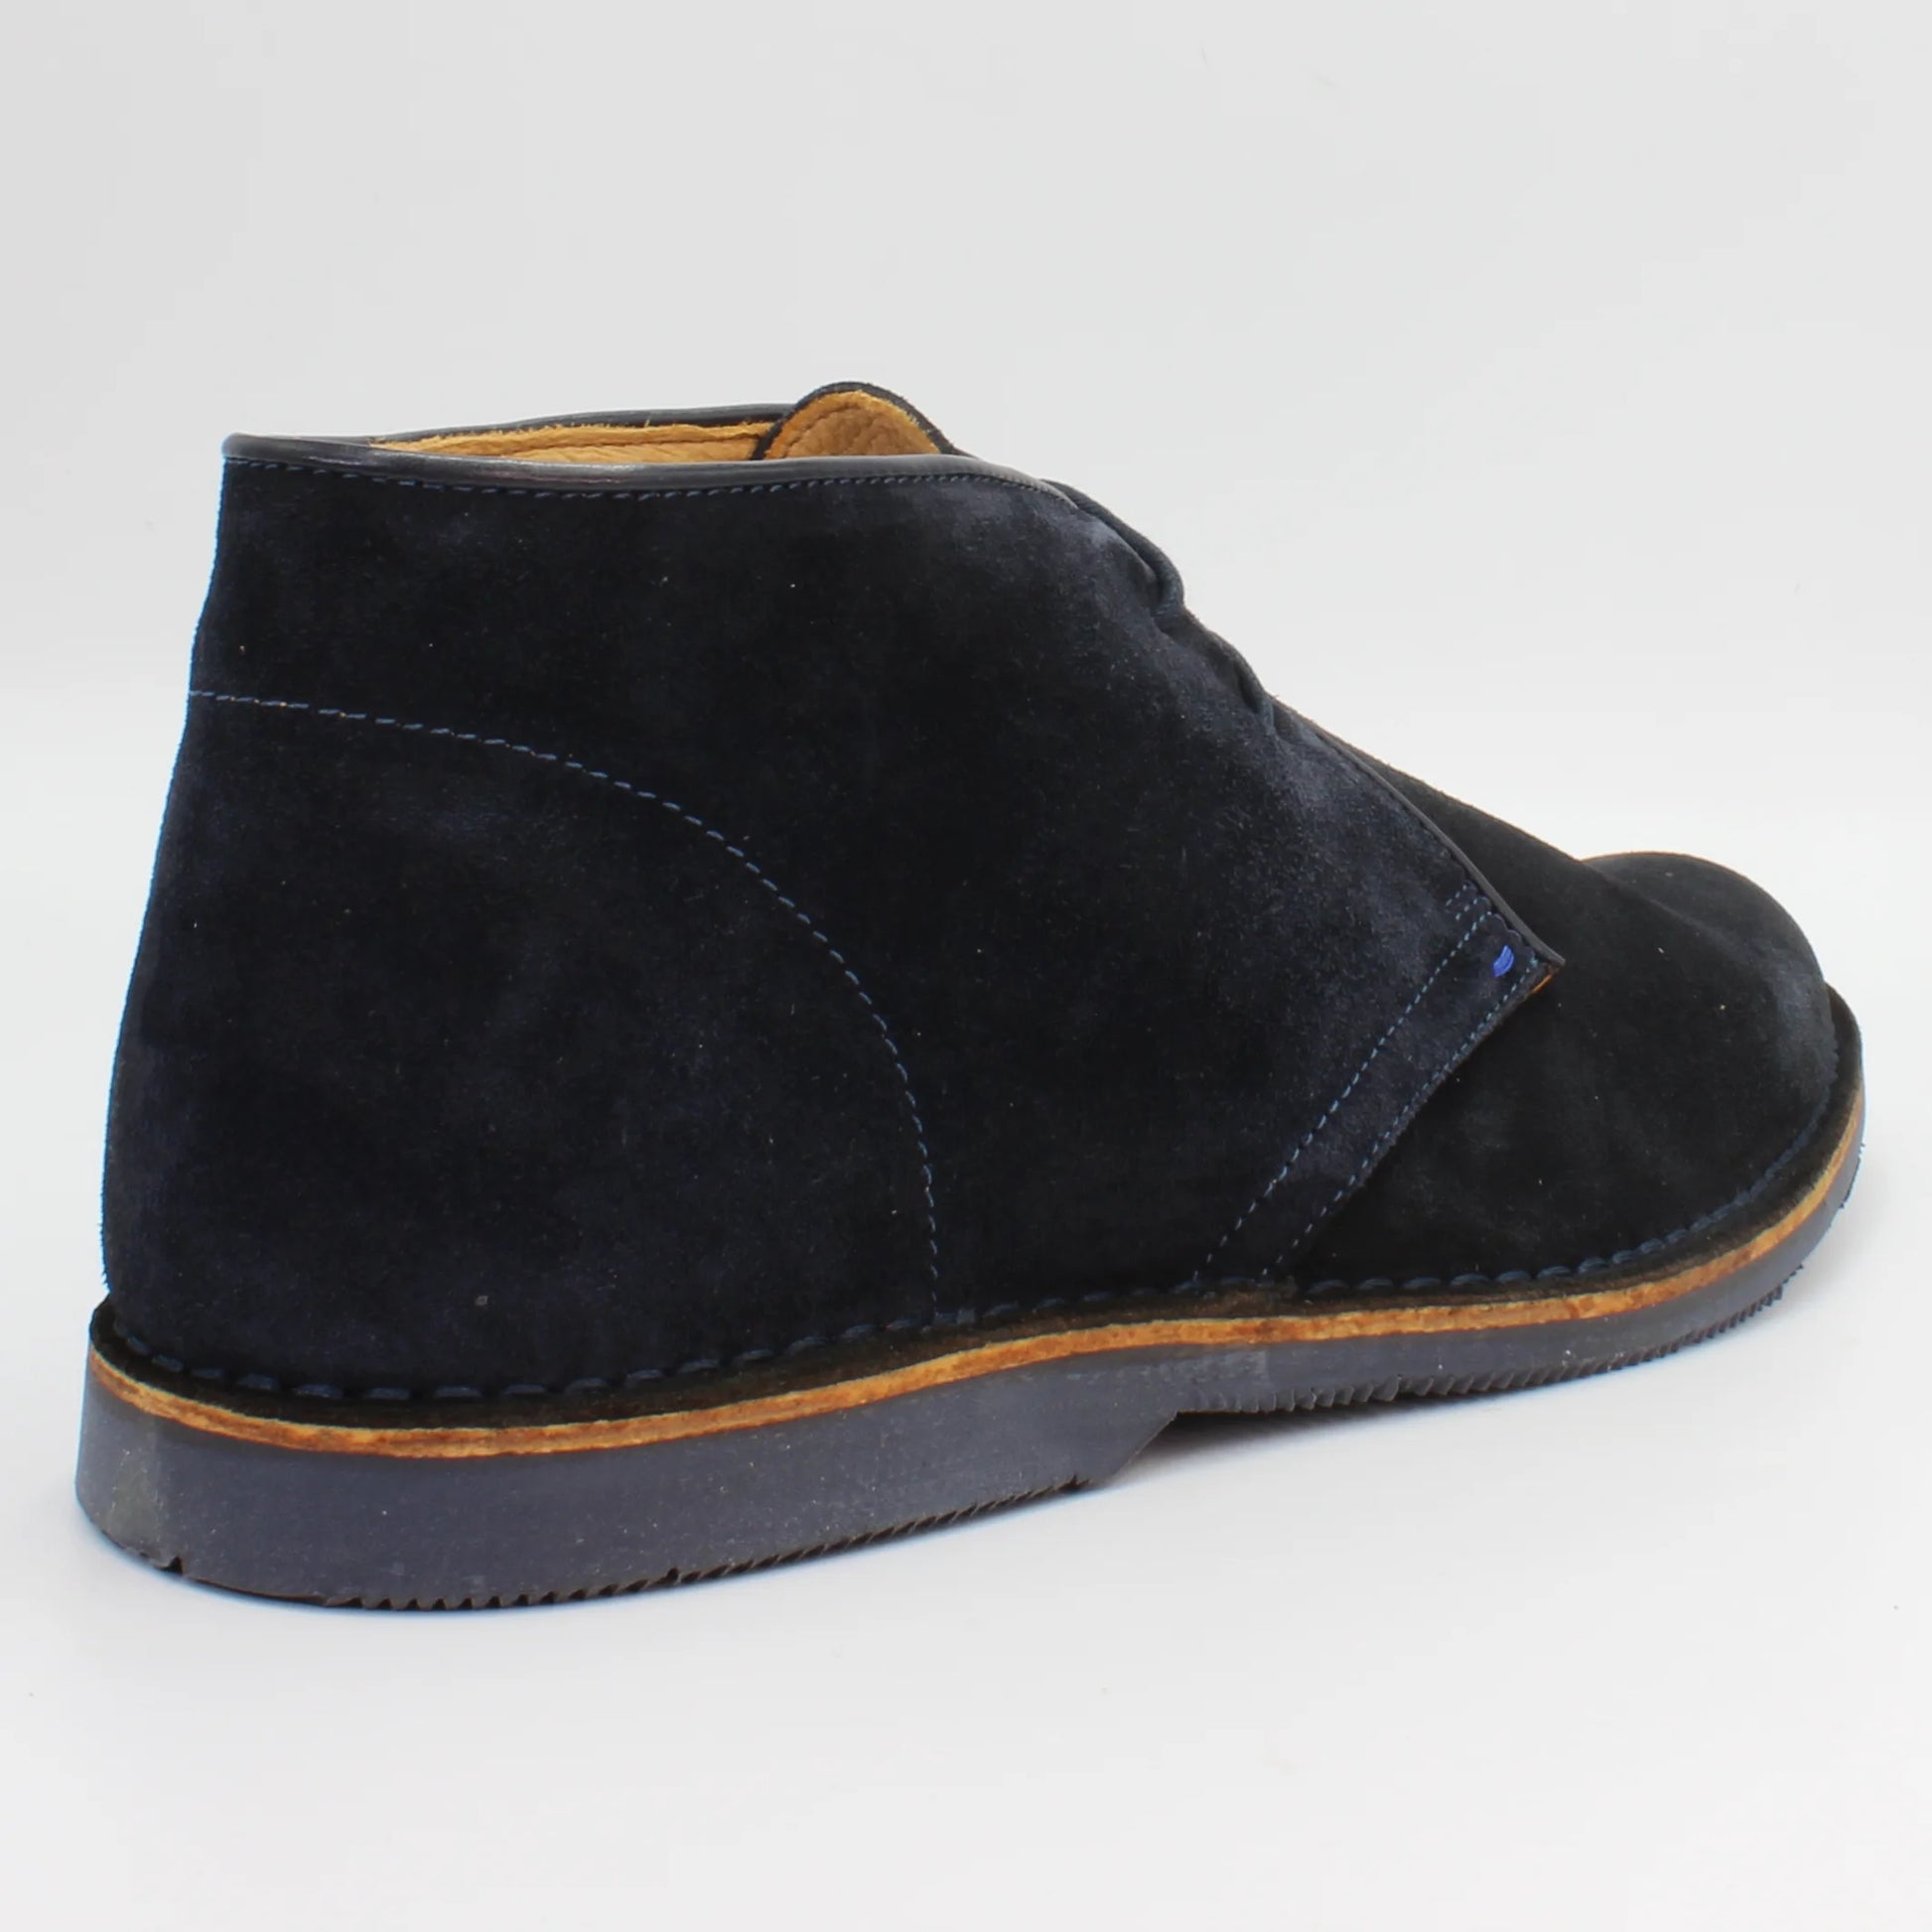 men's genuine suede leather casual desert boot in navy made in Italy by Aliverti